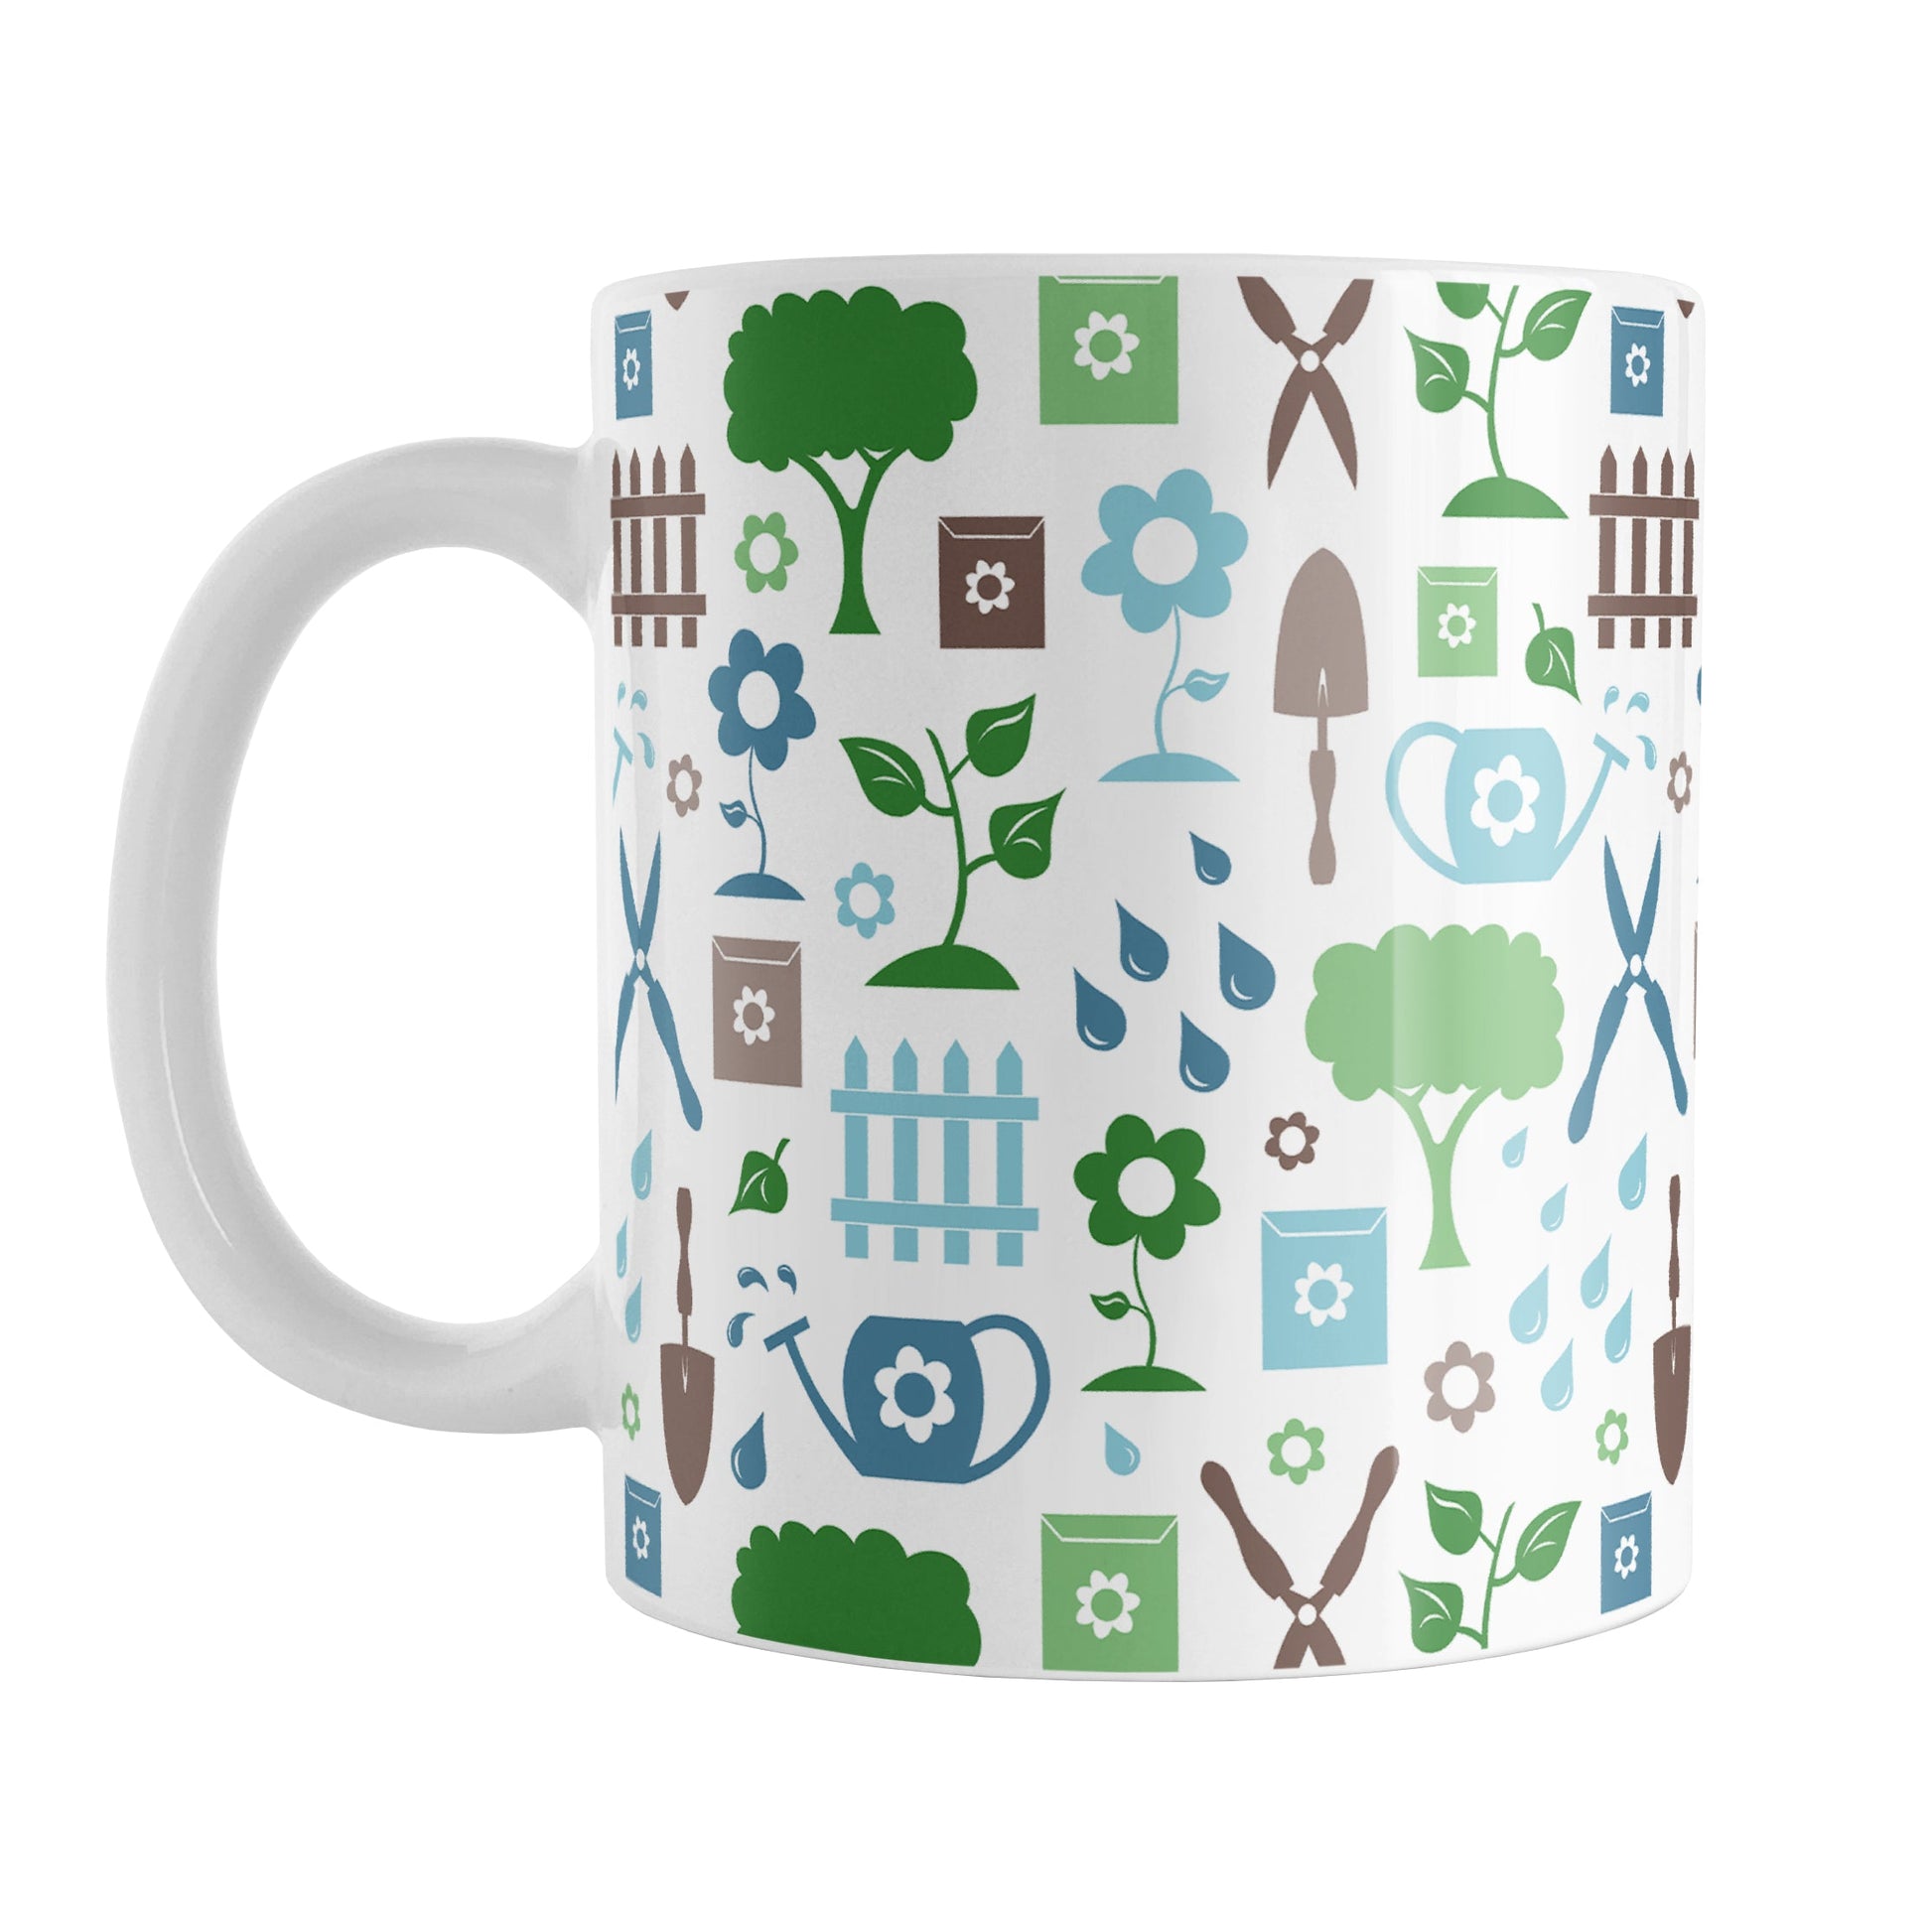 Gardening Pattern Mug (11oz) at Amy's Coffee Mugs. A ceramic coffee mug designed with a gardening pattern with trees, plants, flowers, seed packets, watering cans, fences, and gardening tools in blue, green, and brown. 